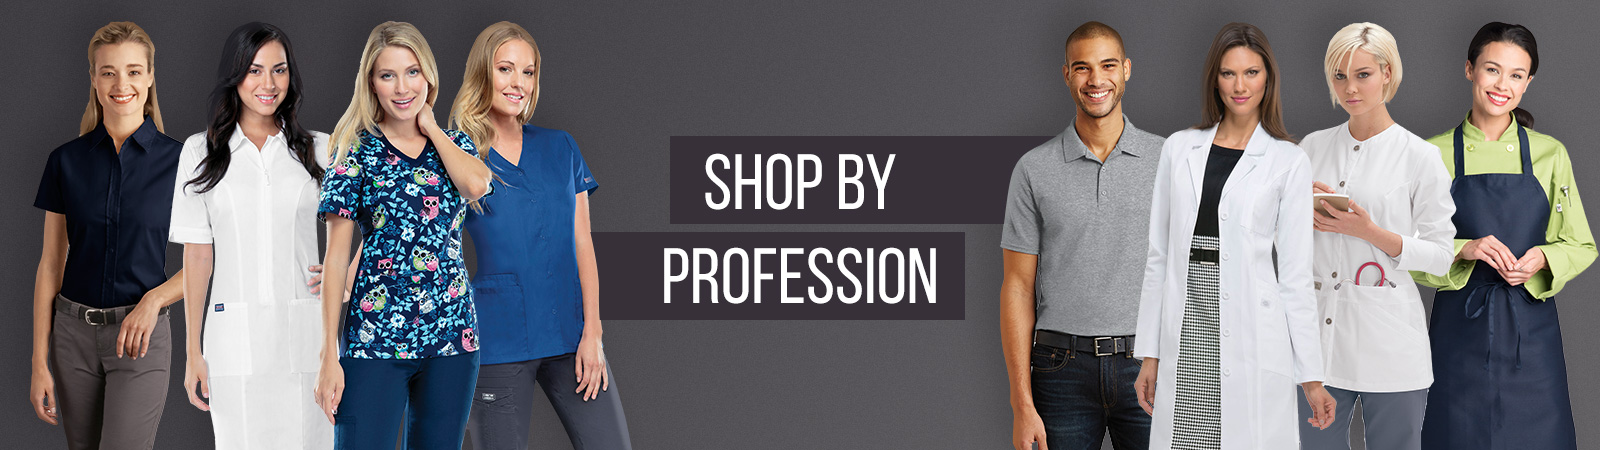 Shop by profession